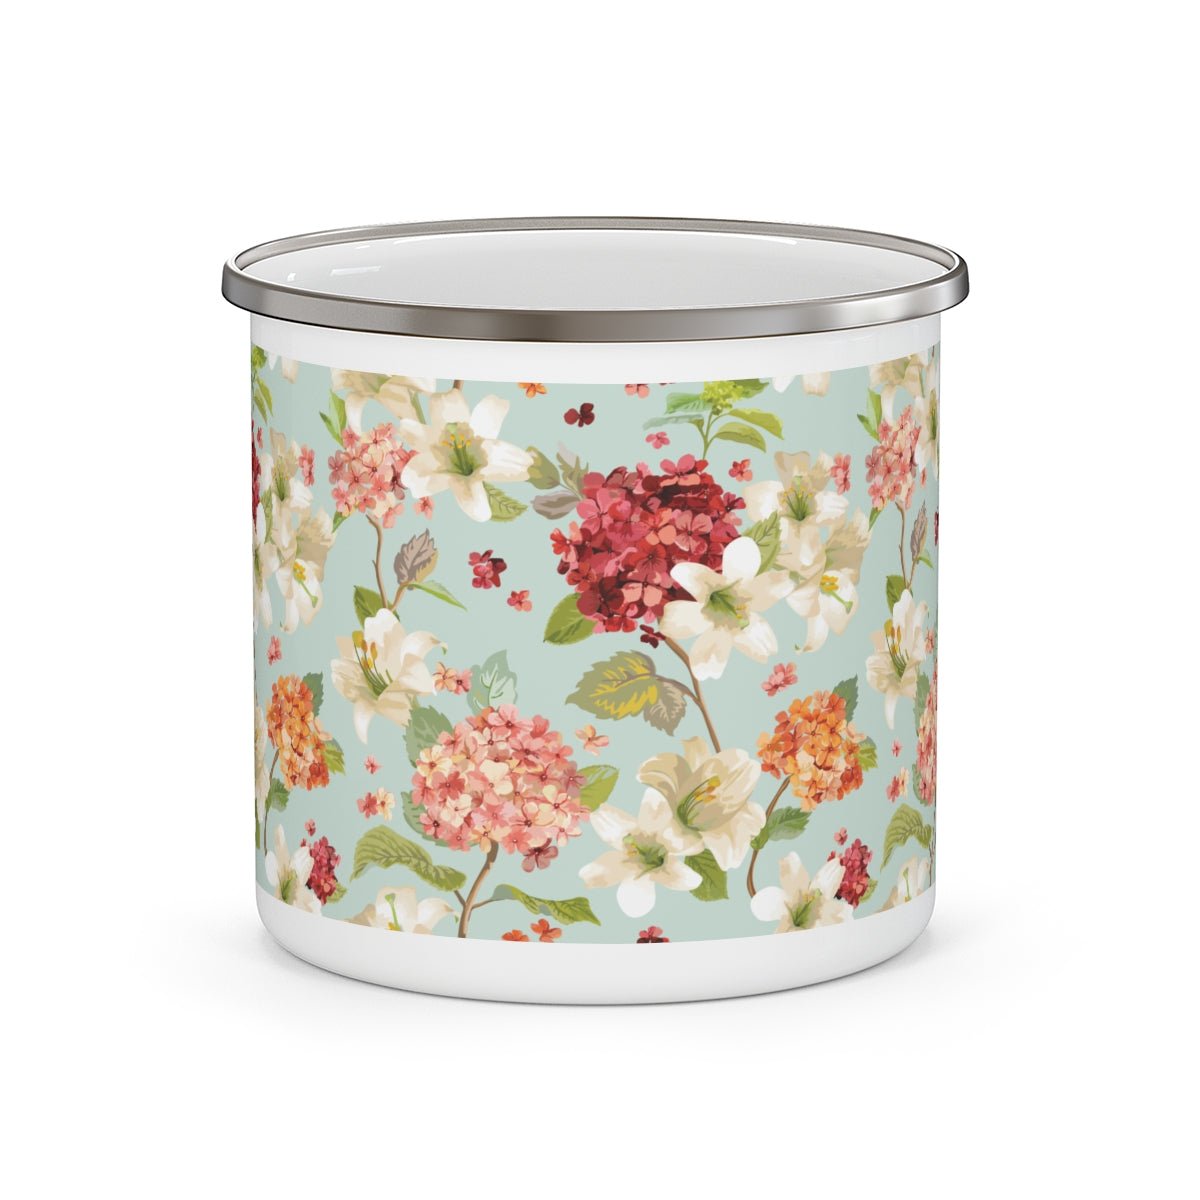 Autumn Hortensia and Lily Flowers Enamel Camping Mug - Puffin Lime